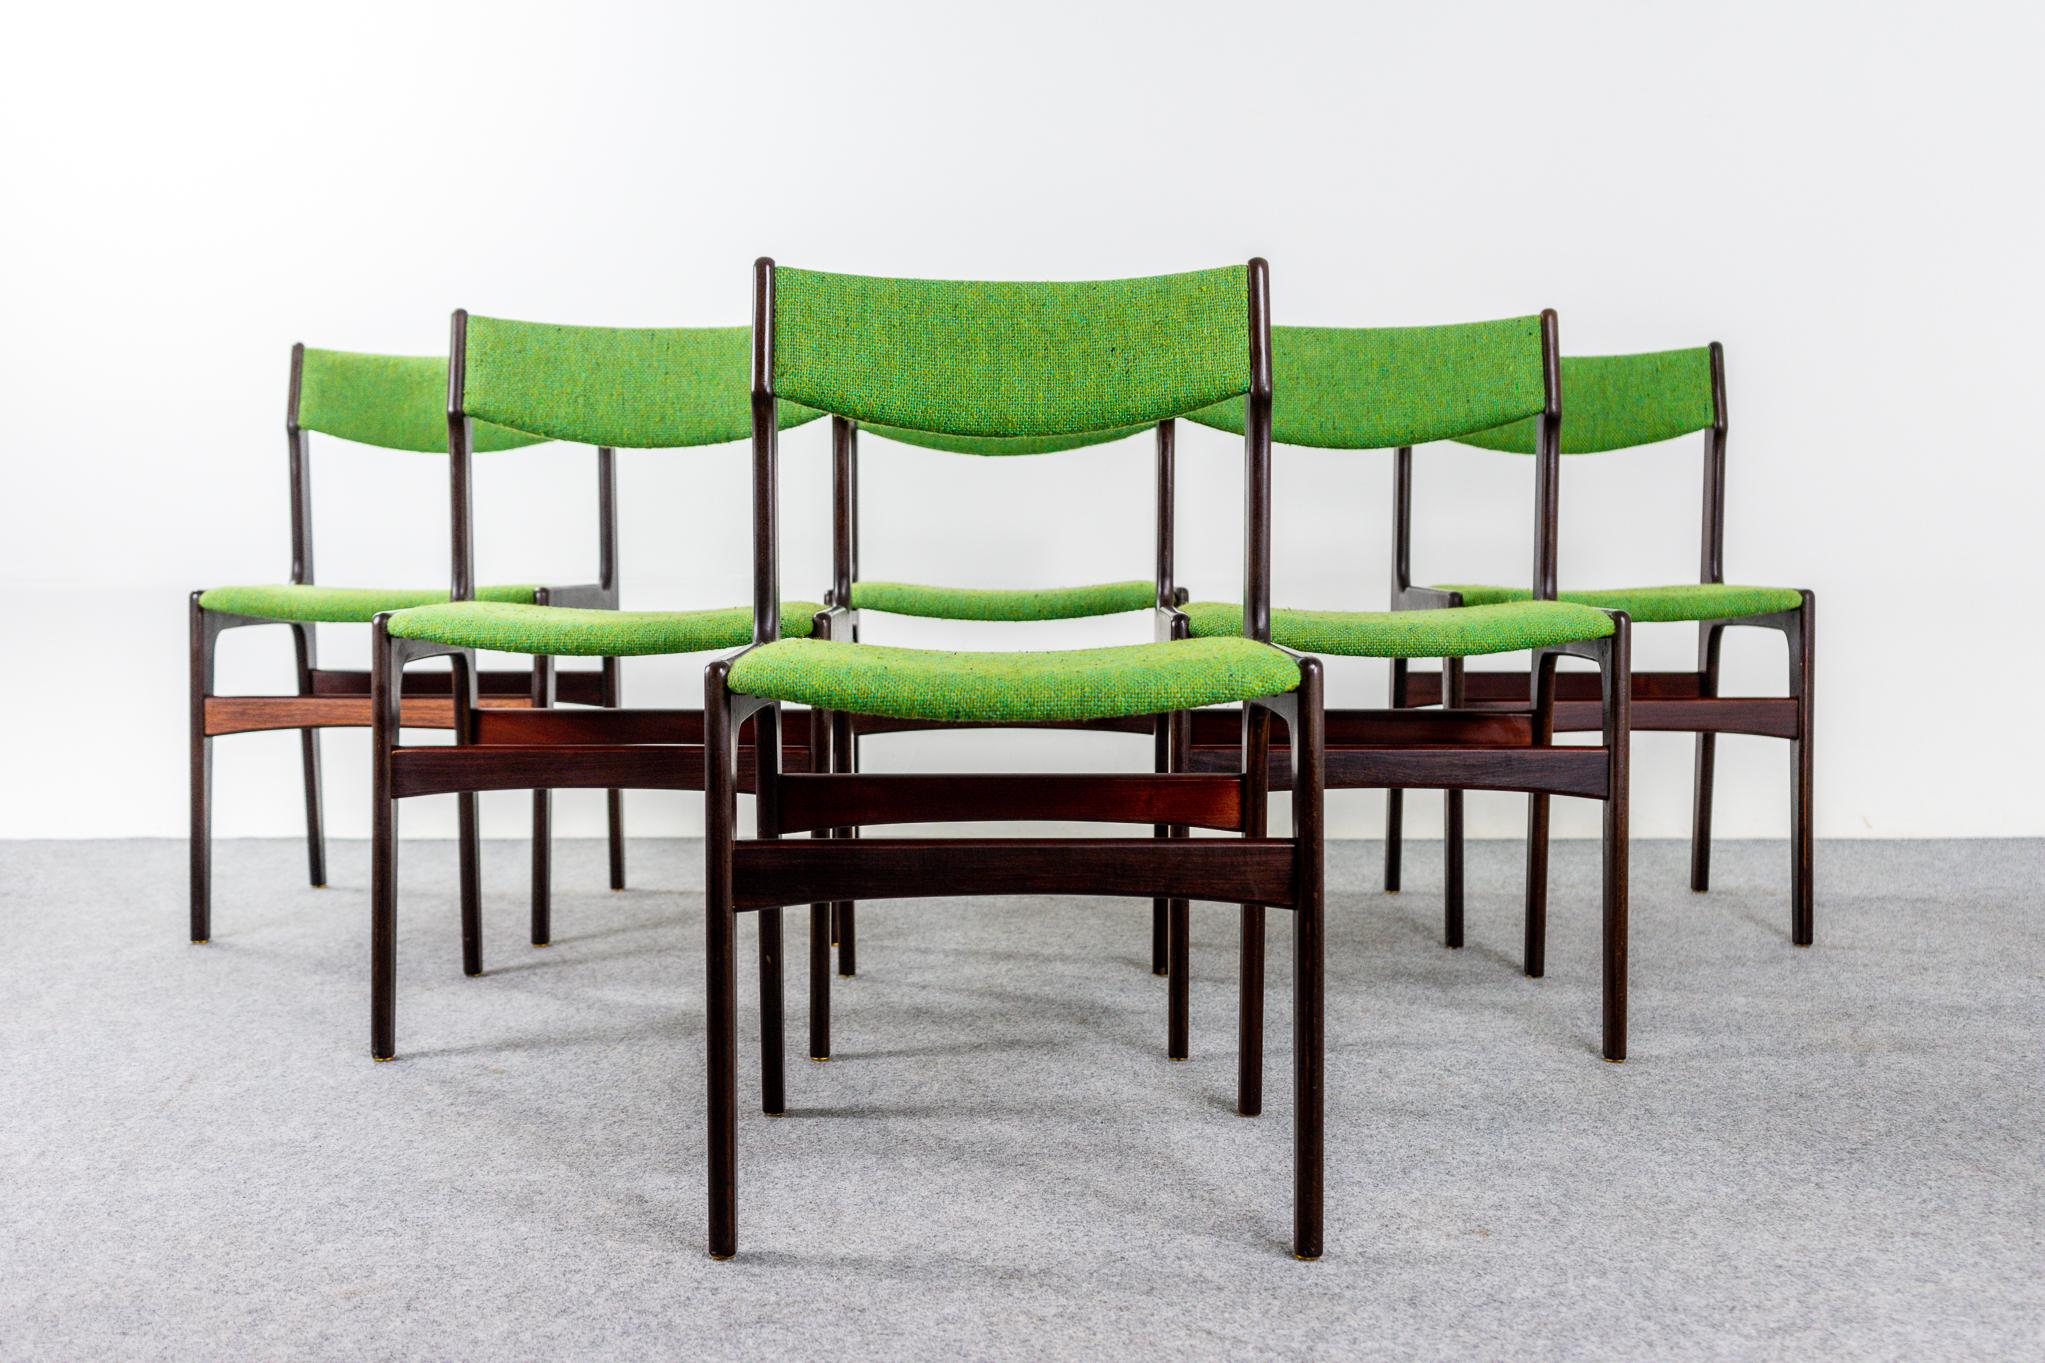 Rosewood dining chairs, circa 1960's. Beautifully curved backrests and generous seat design provide support and comfort. Striking original green upholstery contrasts which well with the dark rosewood veneer.  

Unrestored item, some marks consistent